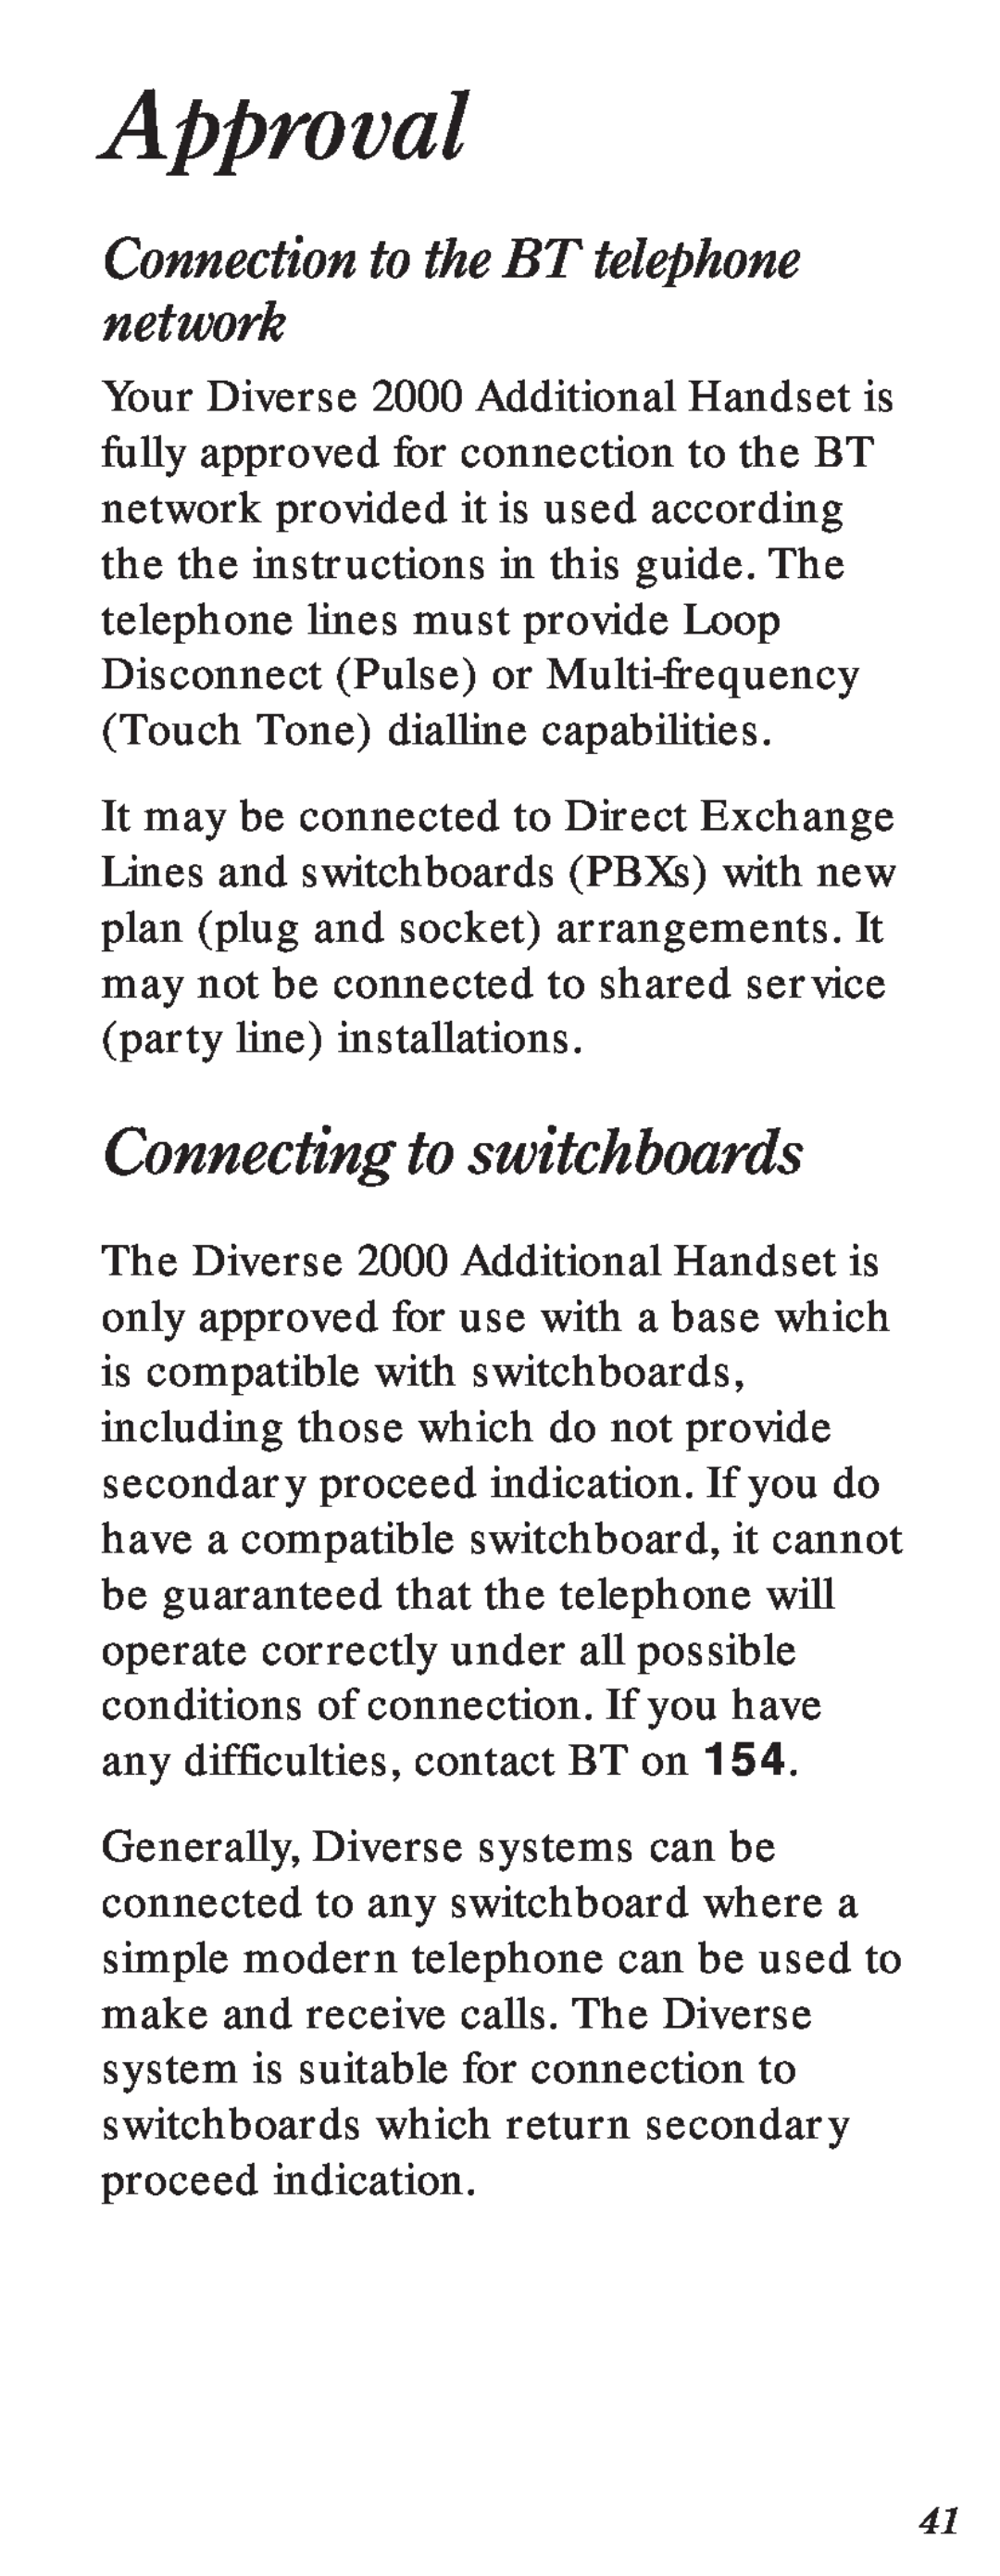 BT 2000 user manual Approval, Connecting to switchboards 